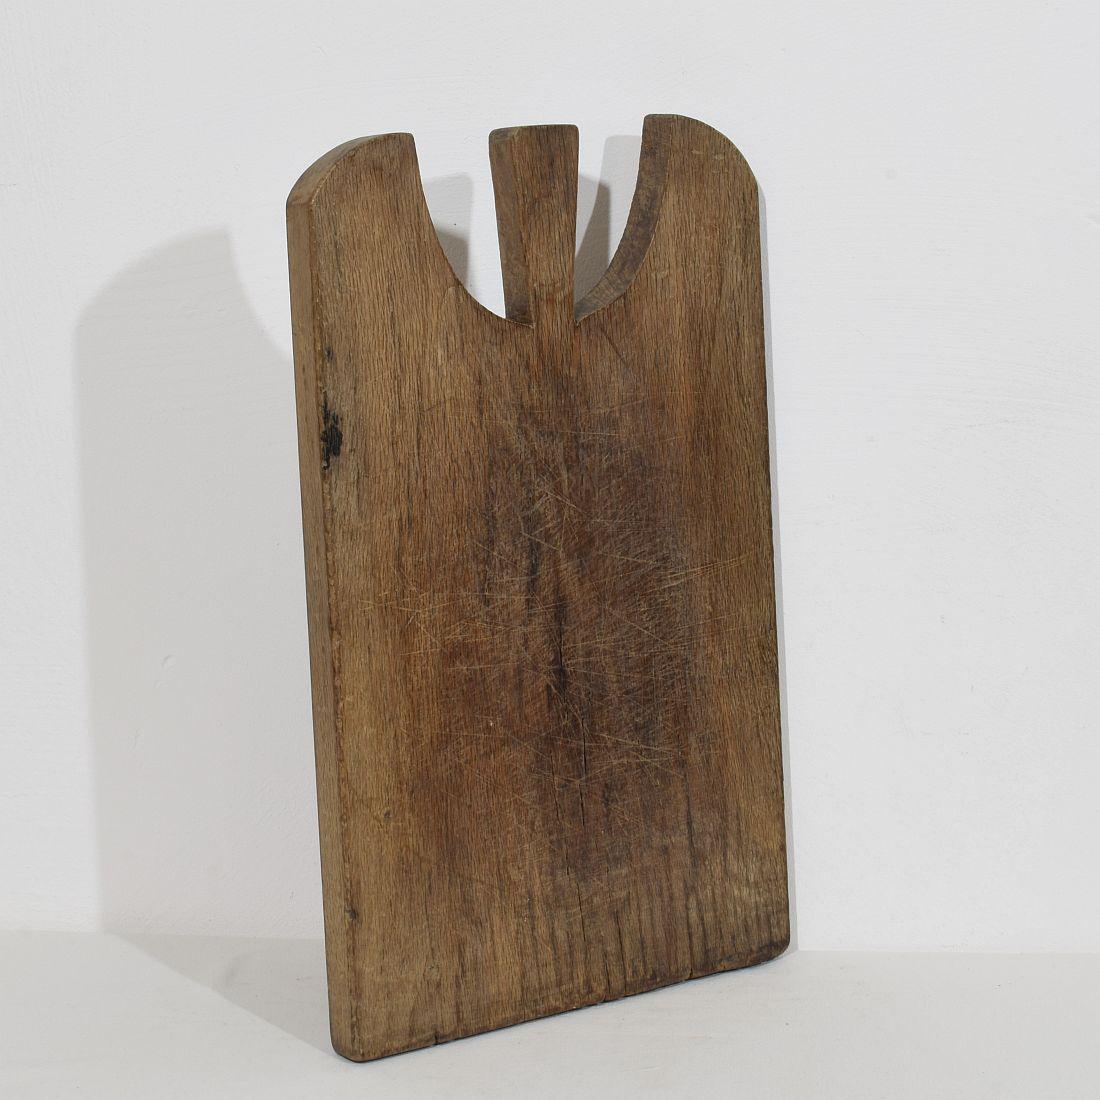 Hand-Crafted Collection of Four Rare French, 19th Century, Wooden Chopping or Cutting Boards